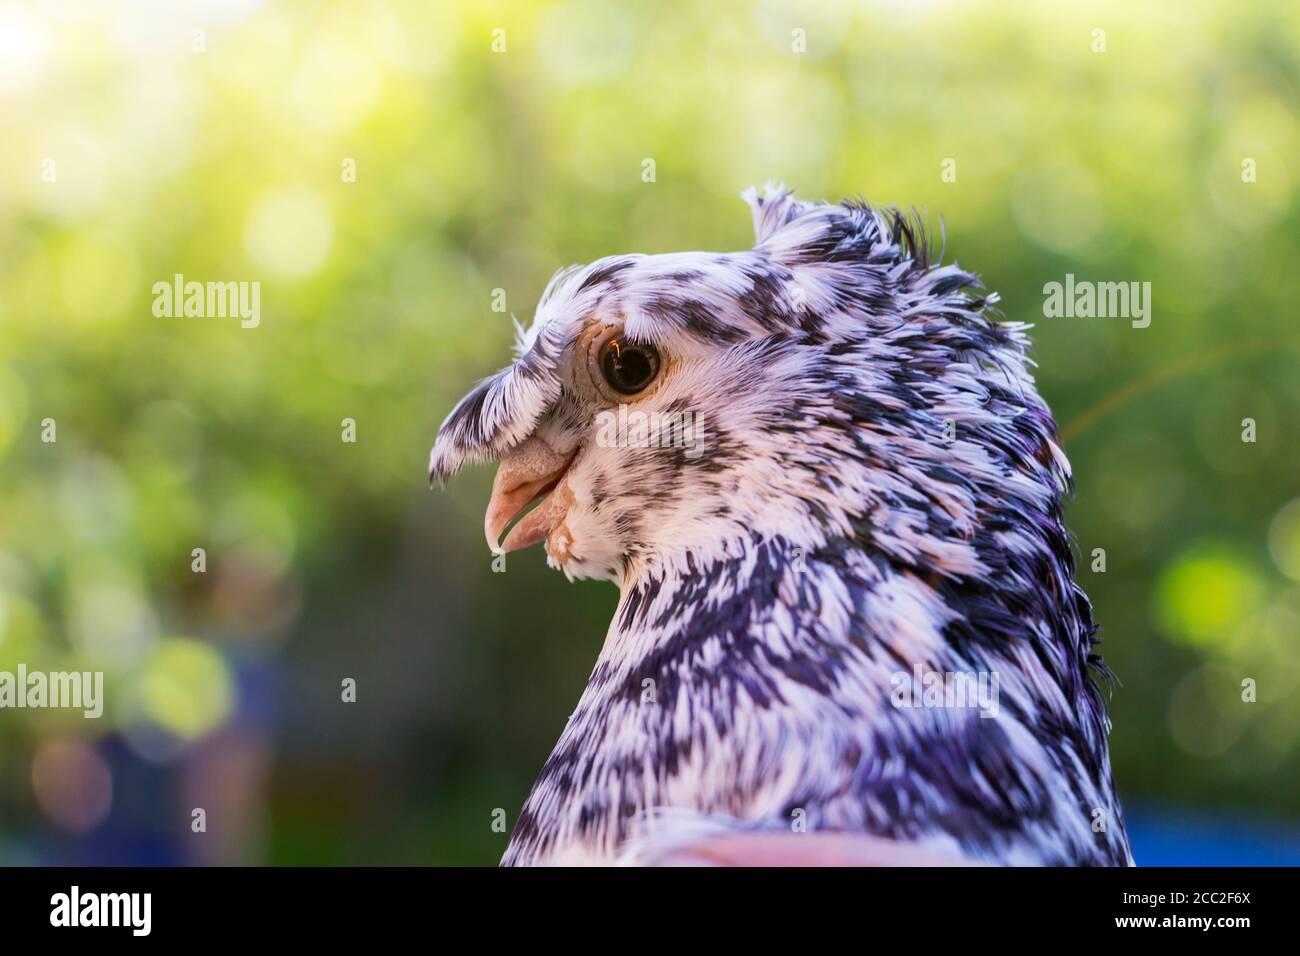 English Fantail pigeon closeup, the background is blurred. Stock Photo